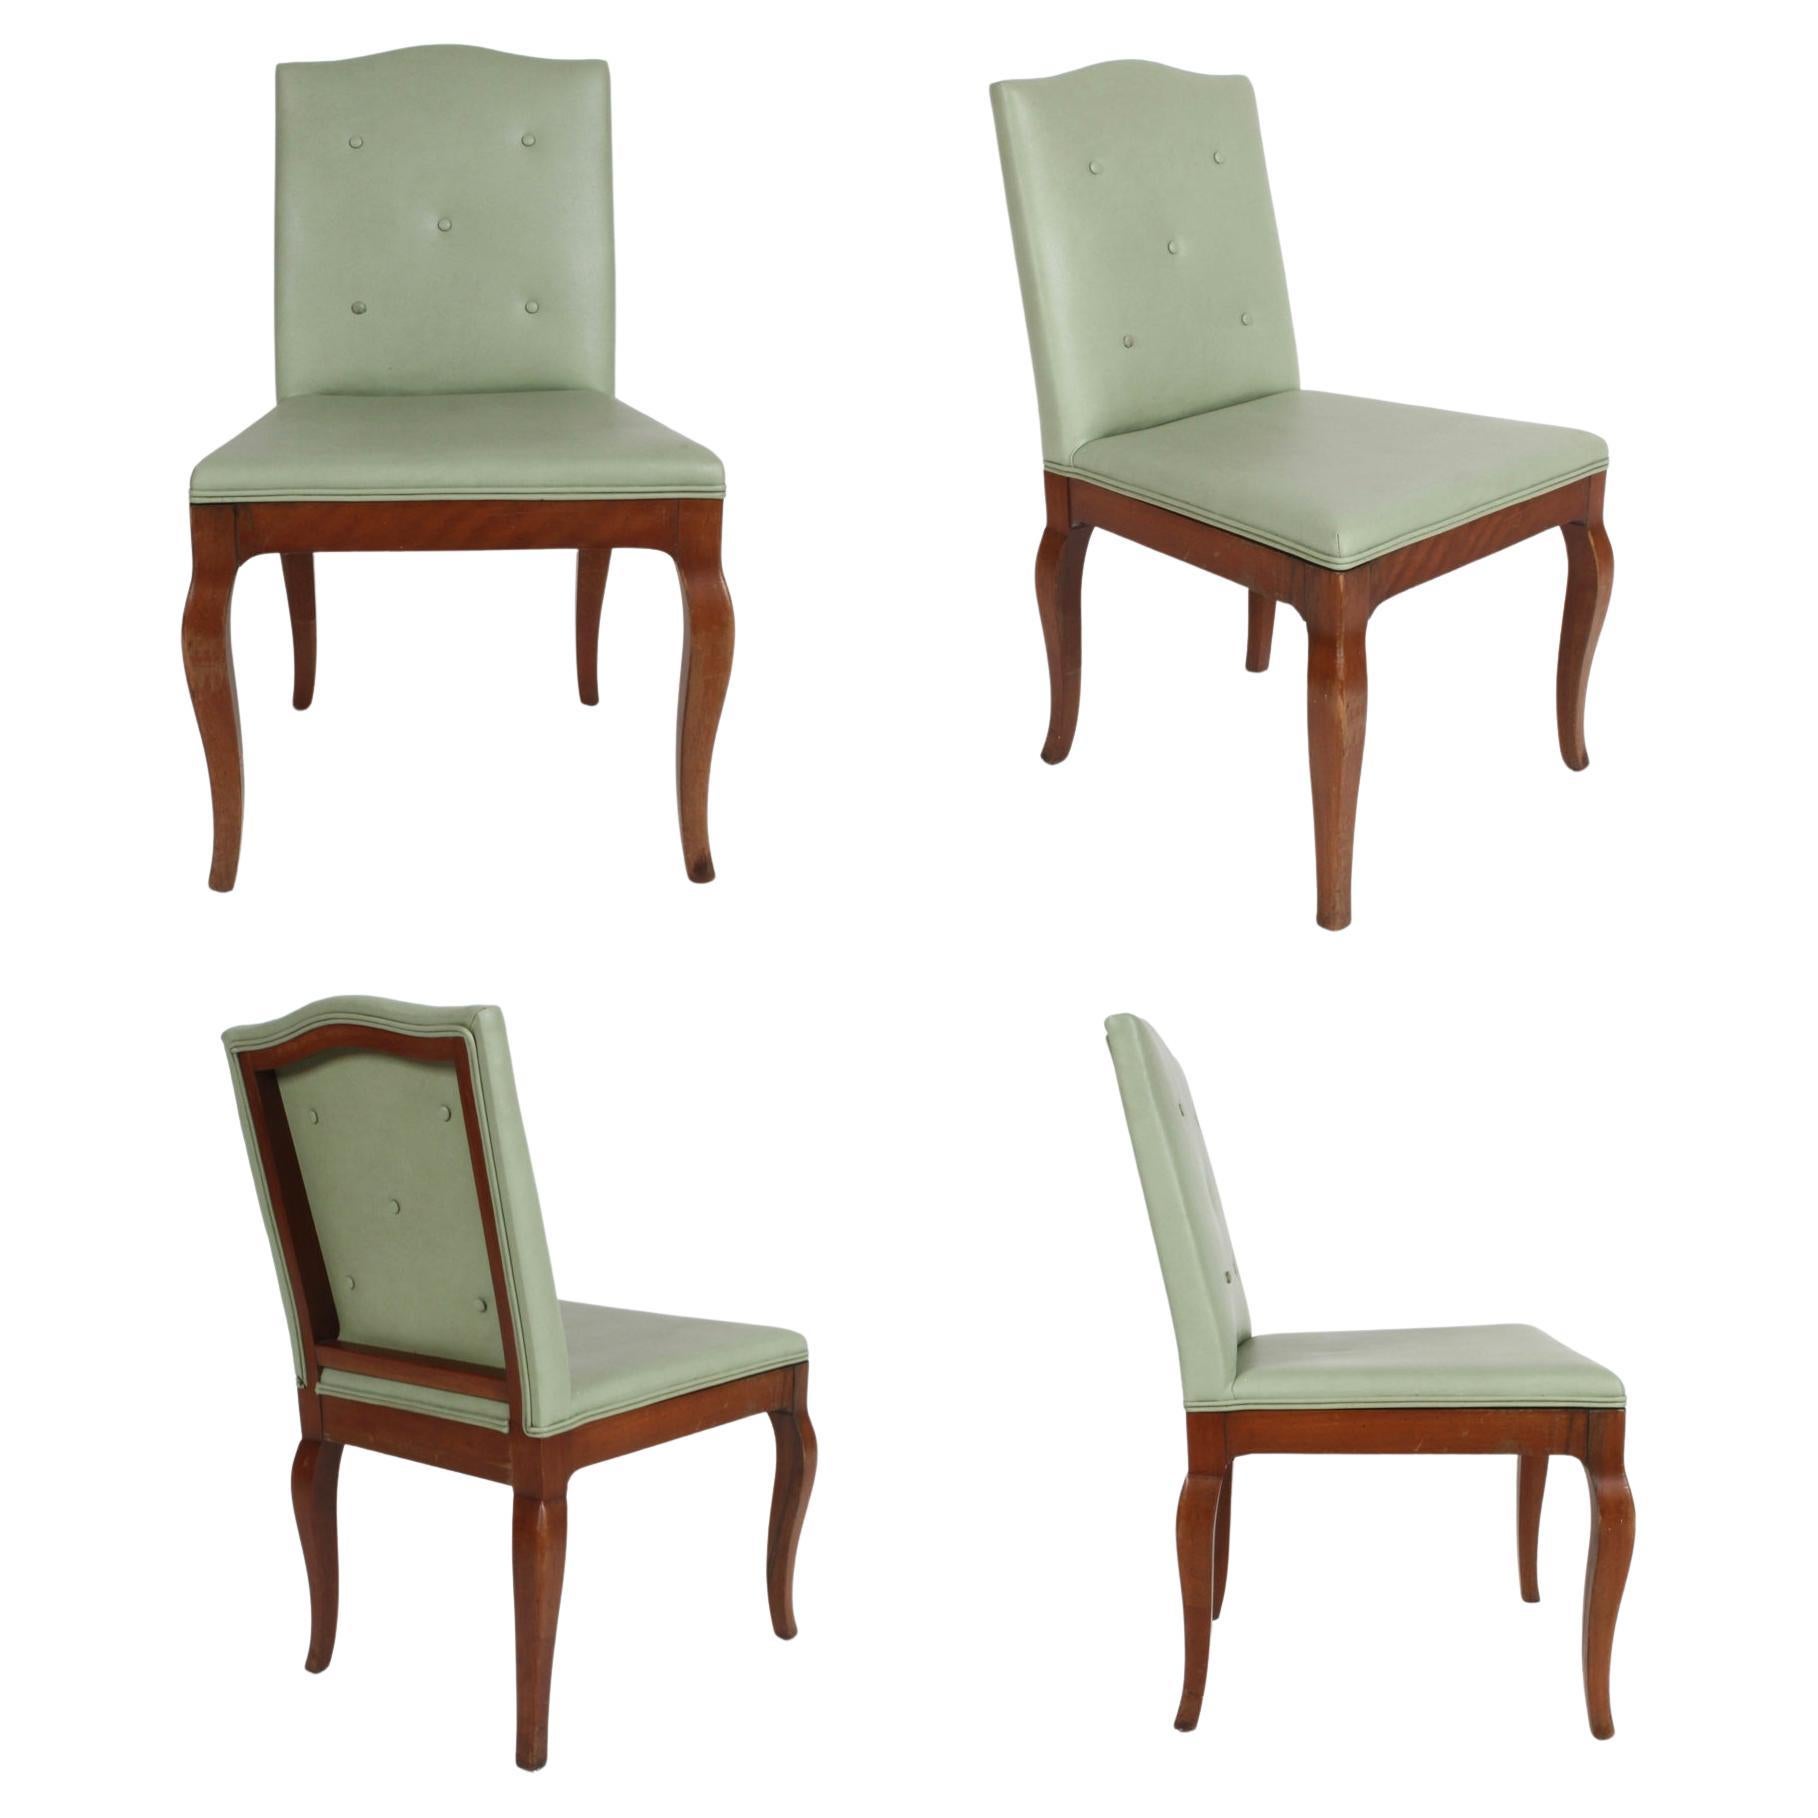 Set of 4 William Billy Haines Style Dining or Game Chairs - Modern Cabriole legs For Sale